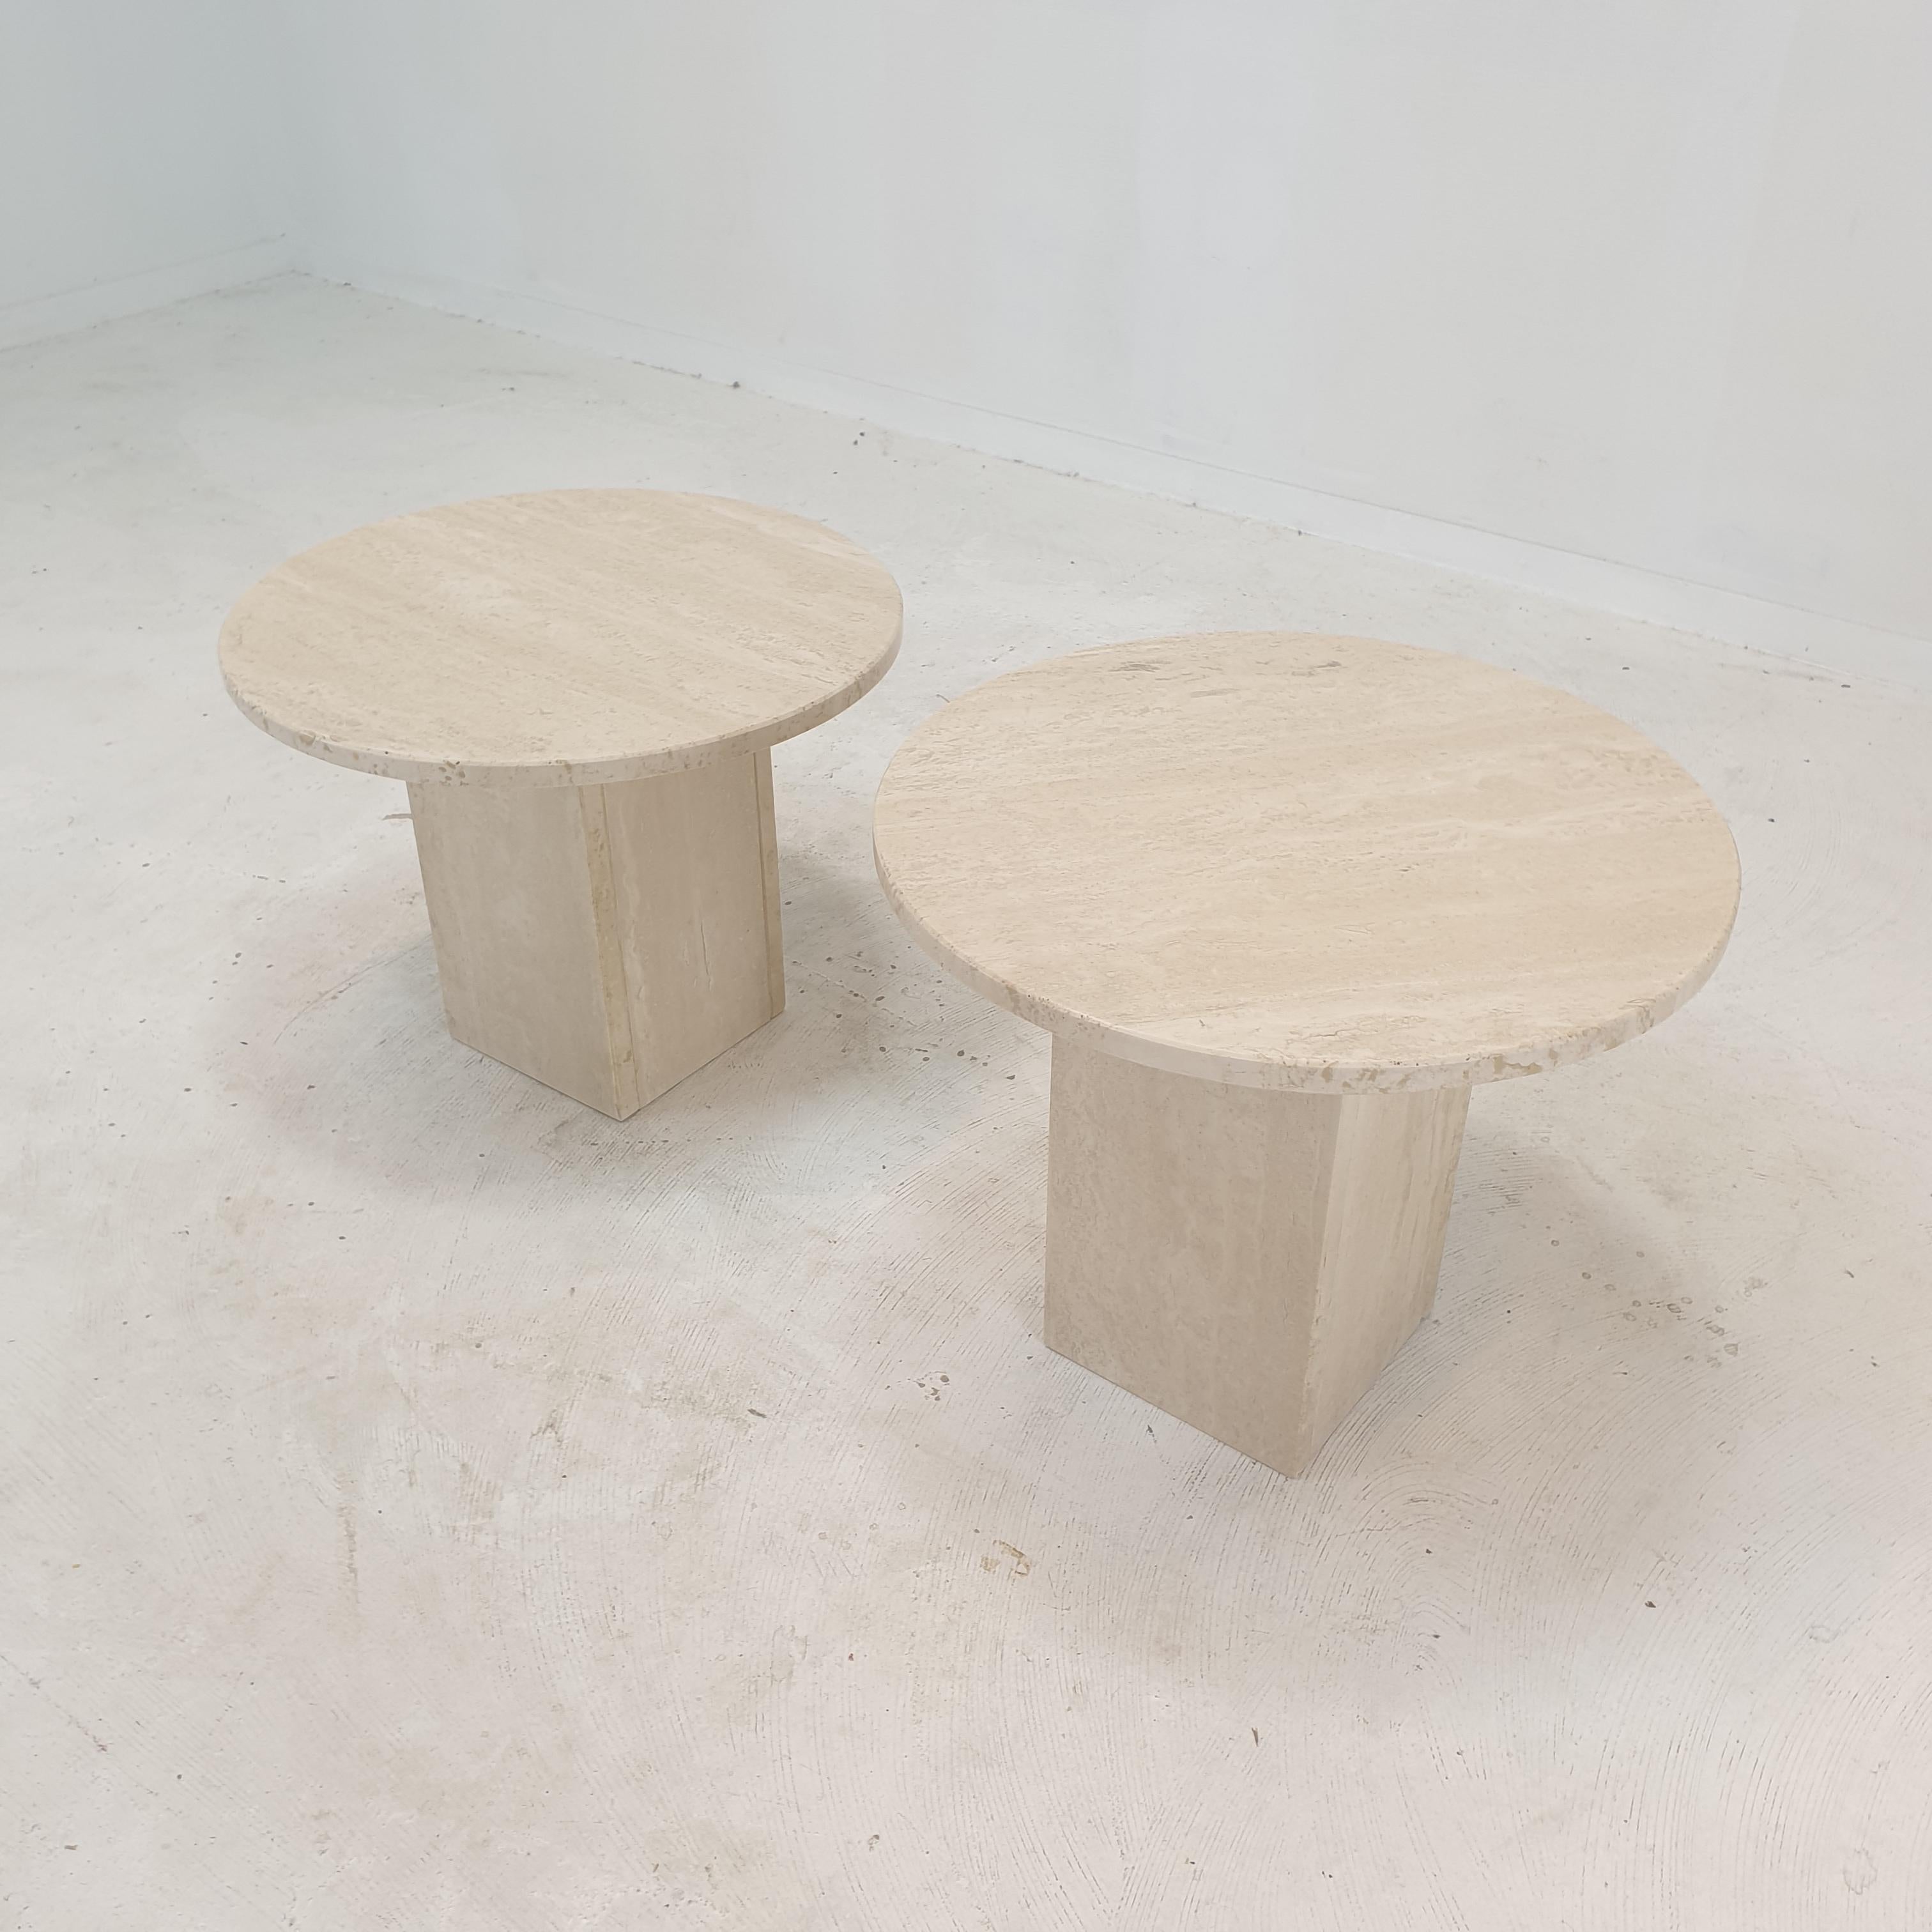 Late 20th Century Set of 2 Italian Travertine Coffee or Side Tables, 1980s